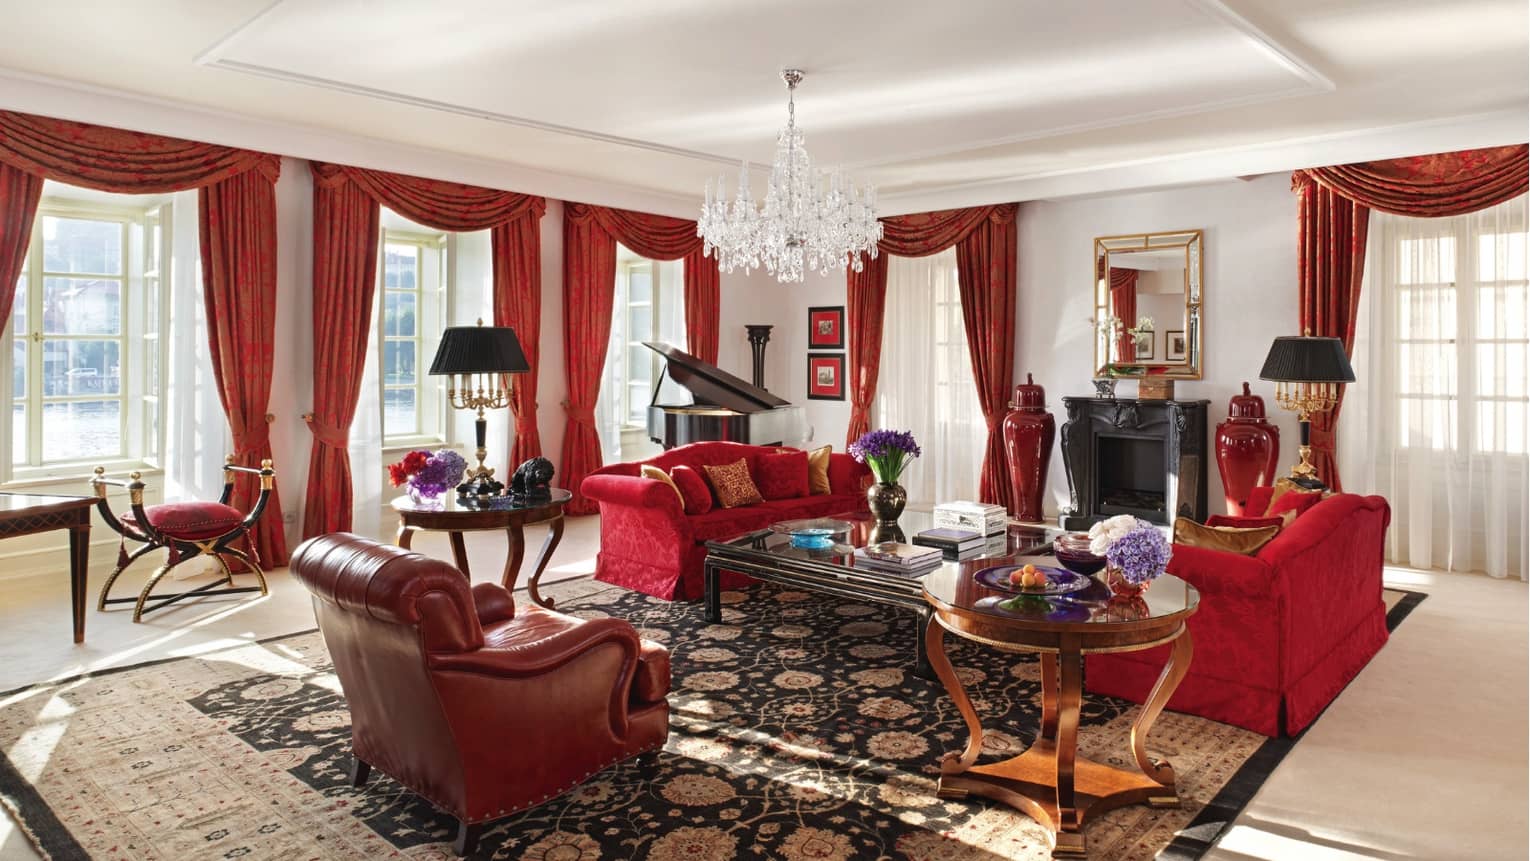 Presidential Suite with red sofas and armchair, red curtains on sunny corner windows, crystal chandelier 